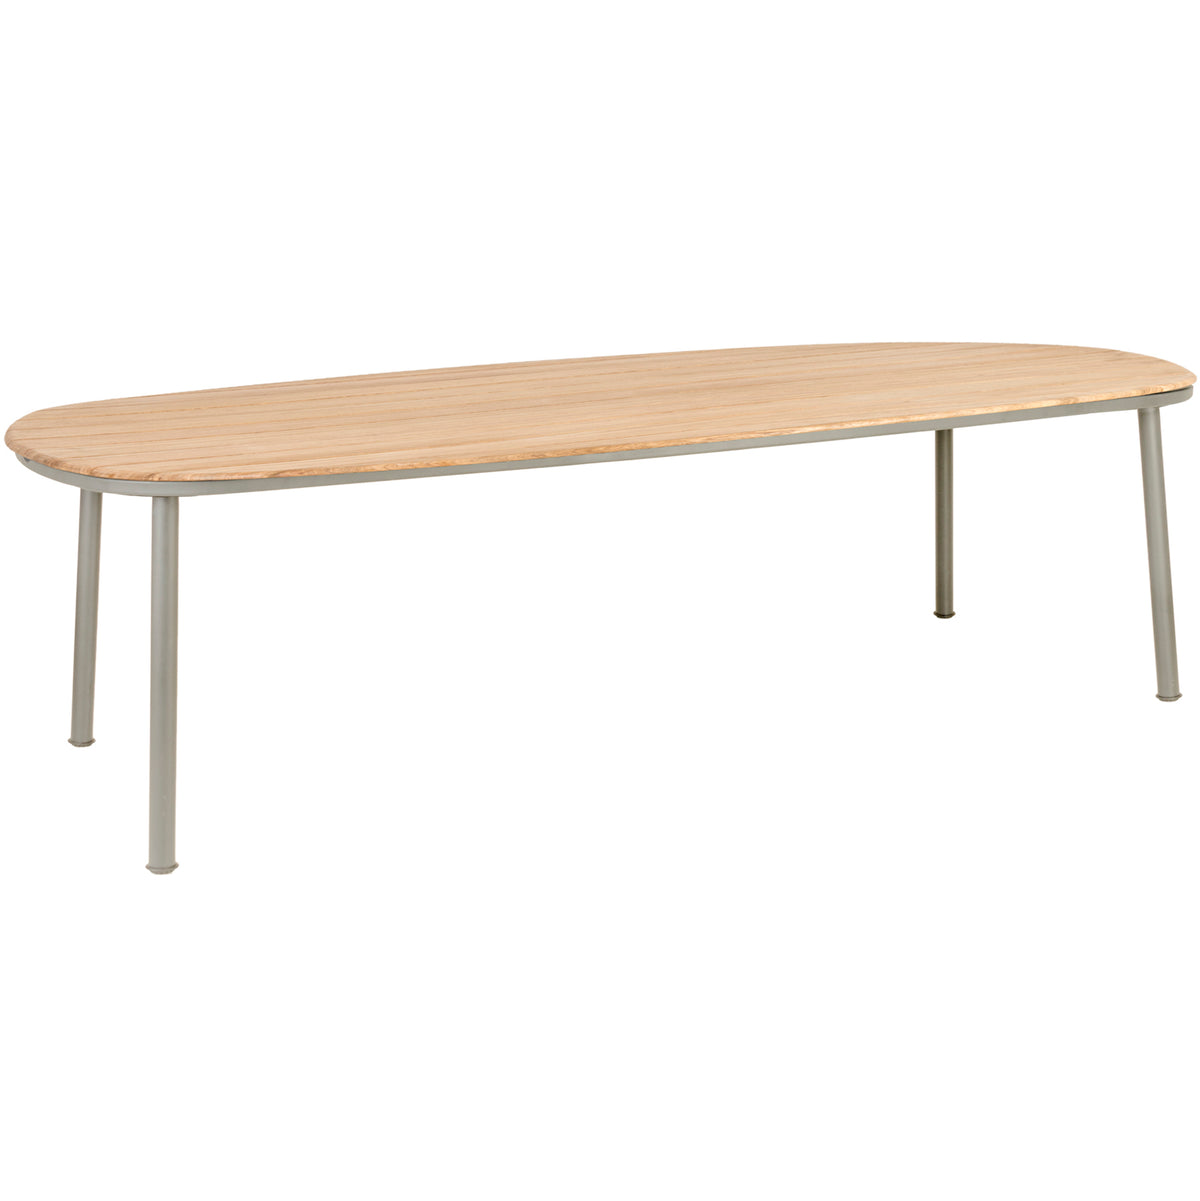 Alexander Rose Cordial Beige Shaped Dining Table with Roble Top (2.6m x 1.2m)